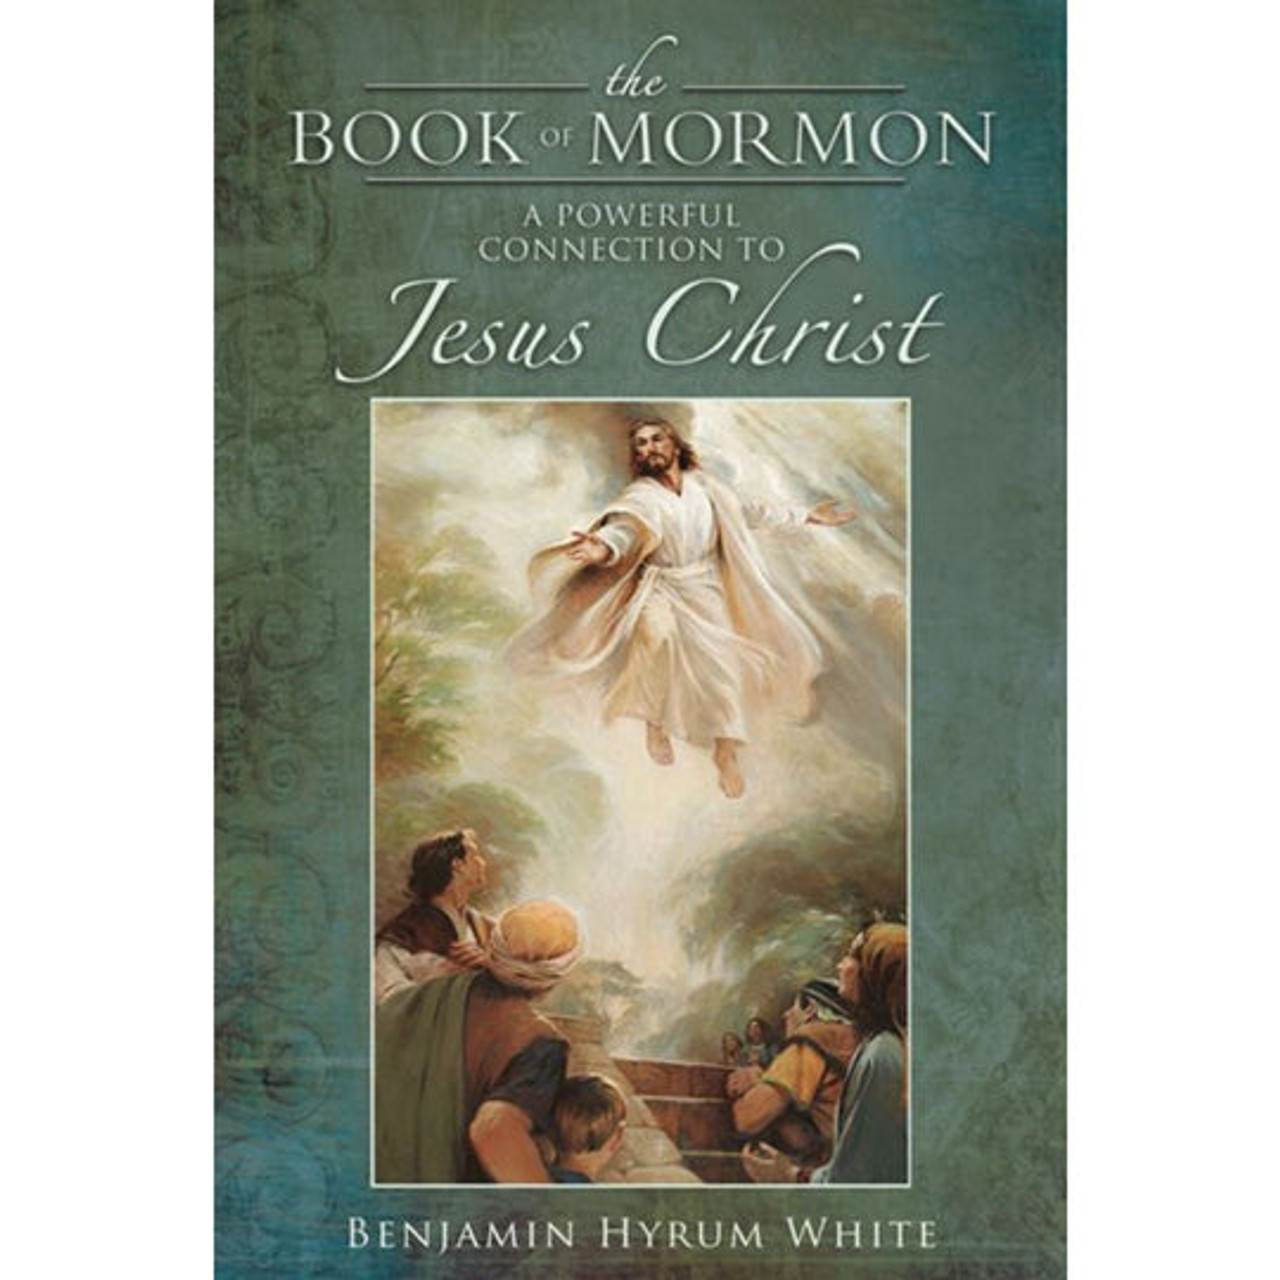 The Book of Mormon: A Powerful Connection to Jesus Christ (Paperback)*